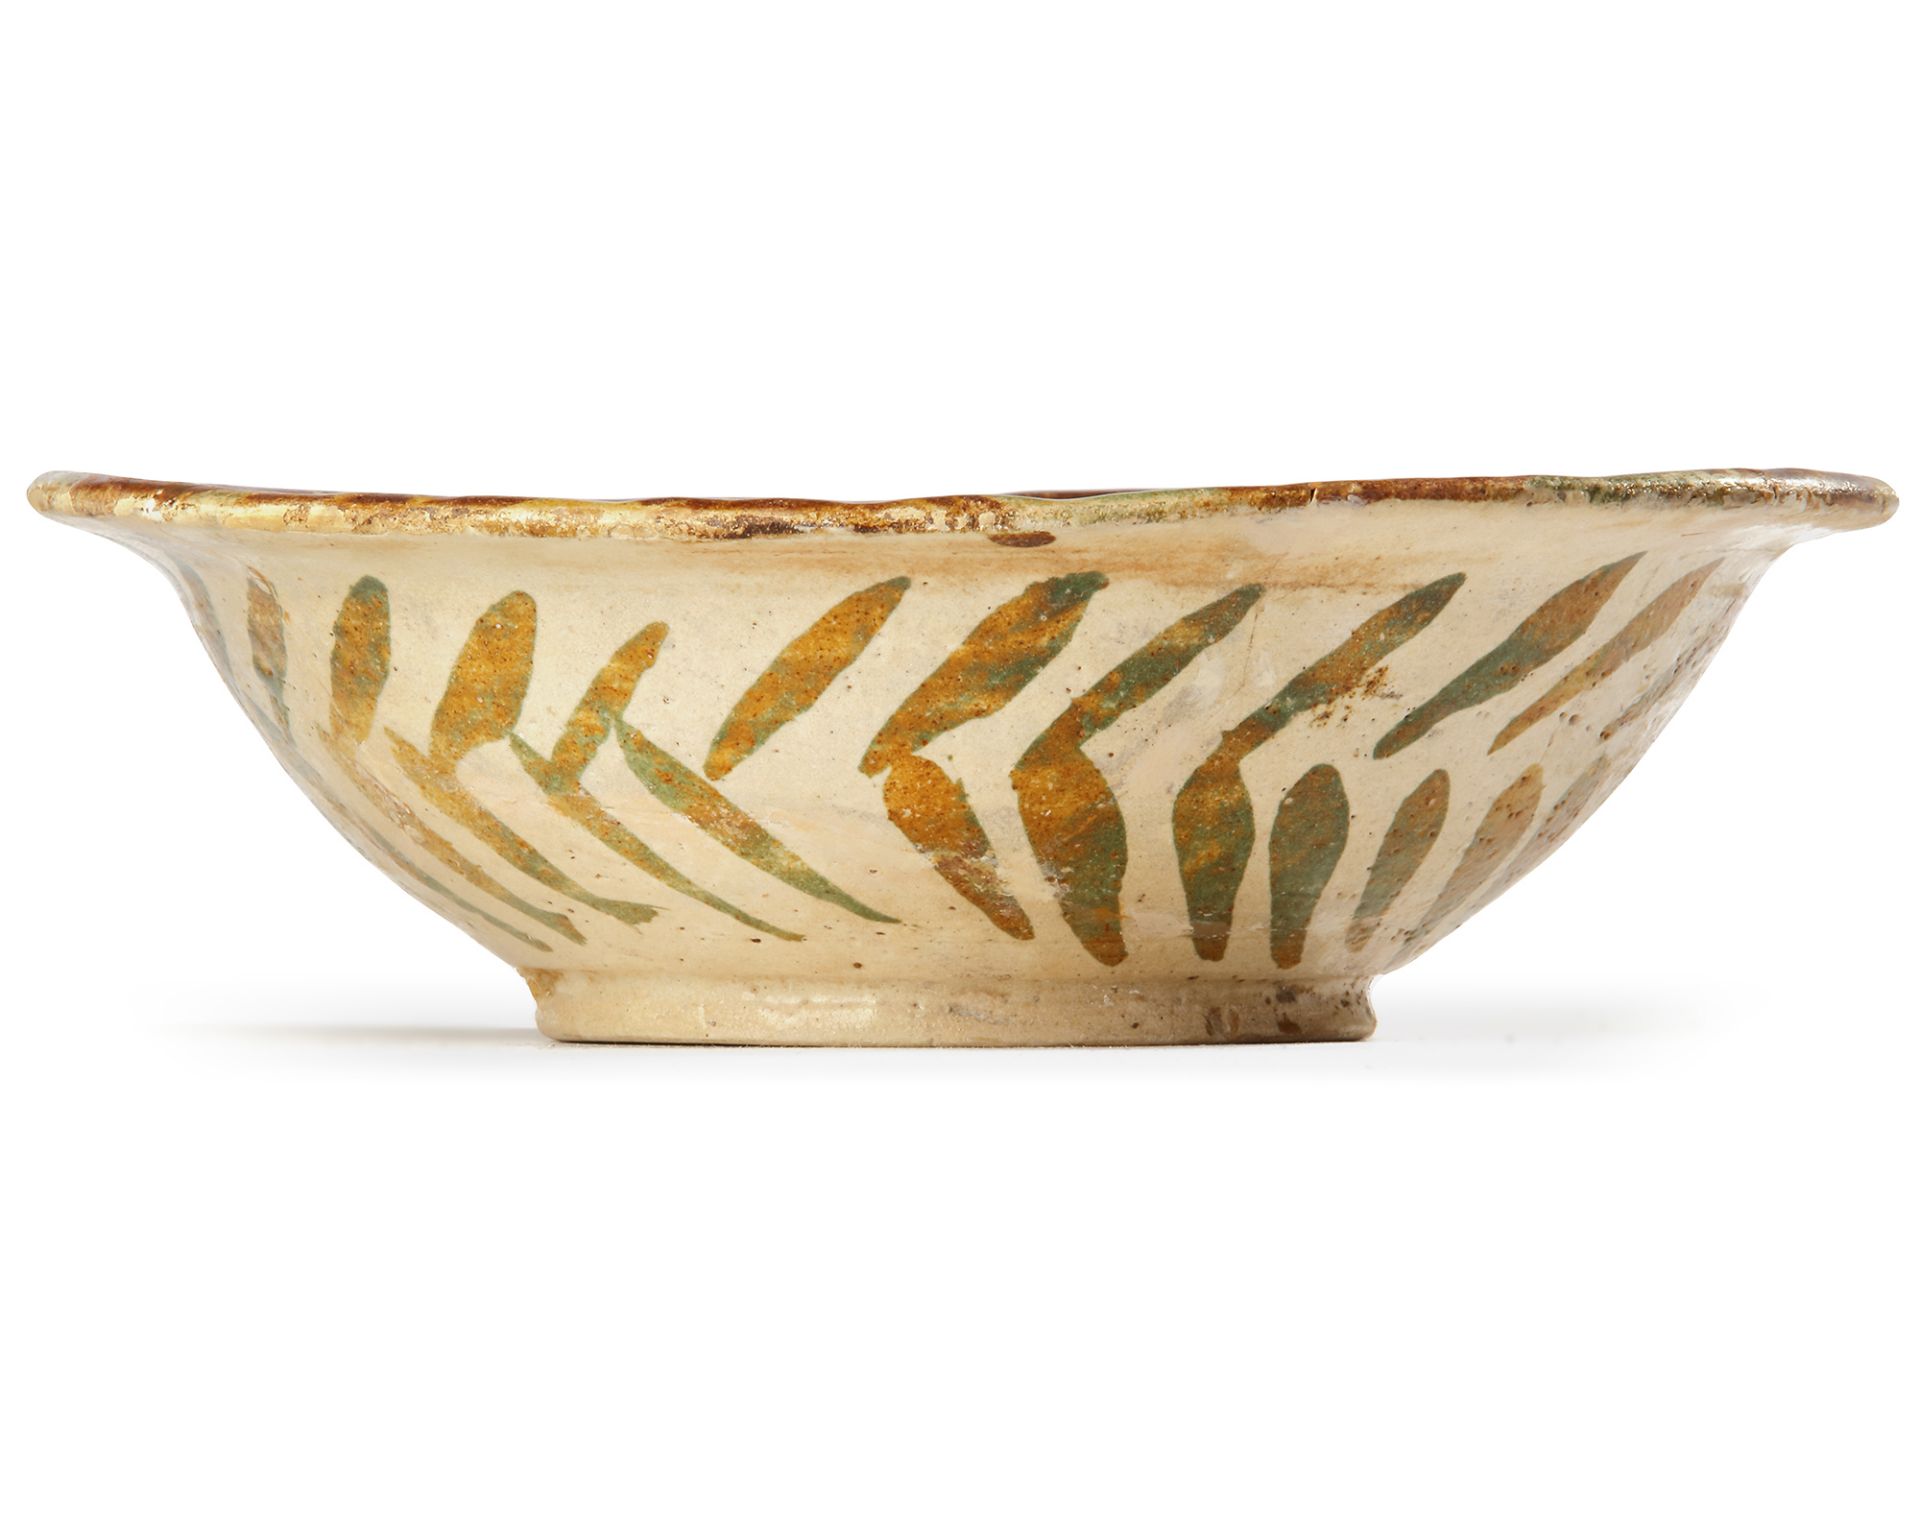 A FIGURAL ABBASID LUSTRE BOWL, MESOPOTAMIA OR CENTRAL ASIA, 9TH CENTURY - Image 4 of 8